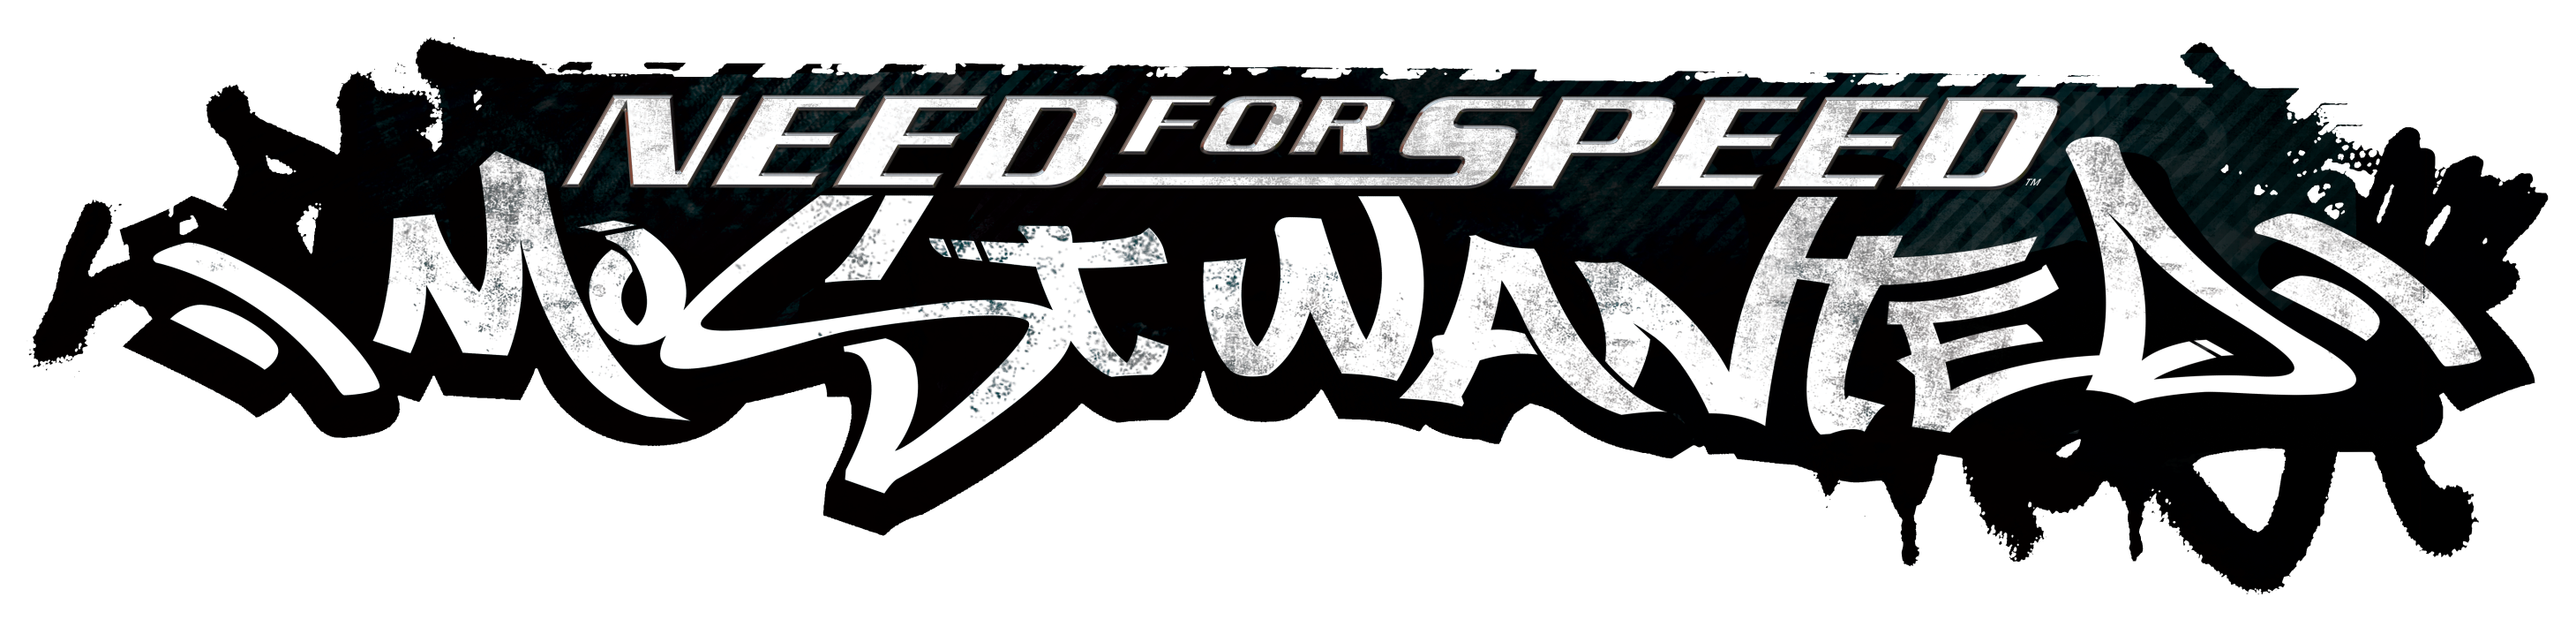 Need logo. NFS most wanted 2005 надпись. NFS most wanted Black Edition логотип. Логотип нфс мост вантед 2005. Need for Speed most wanted 2005 логотип.